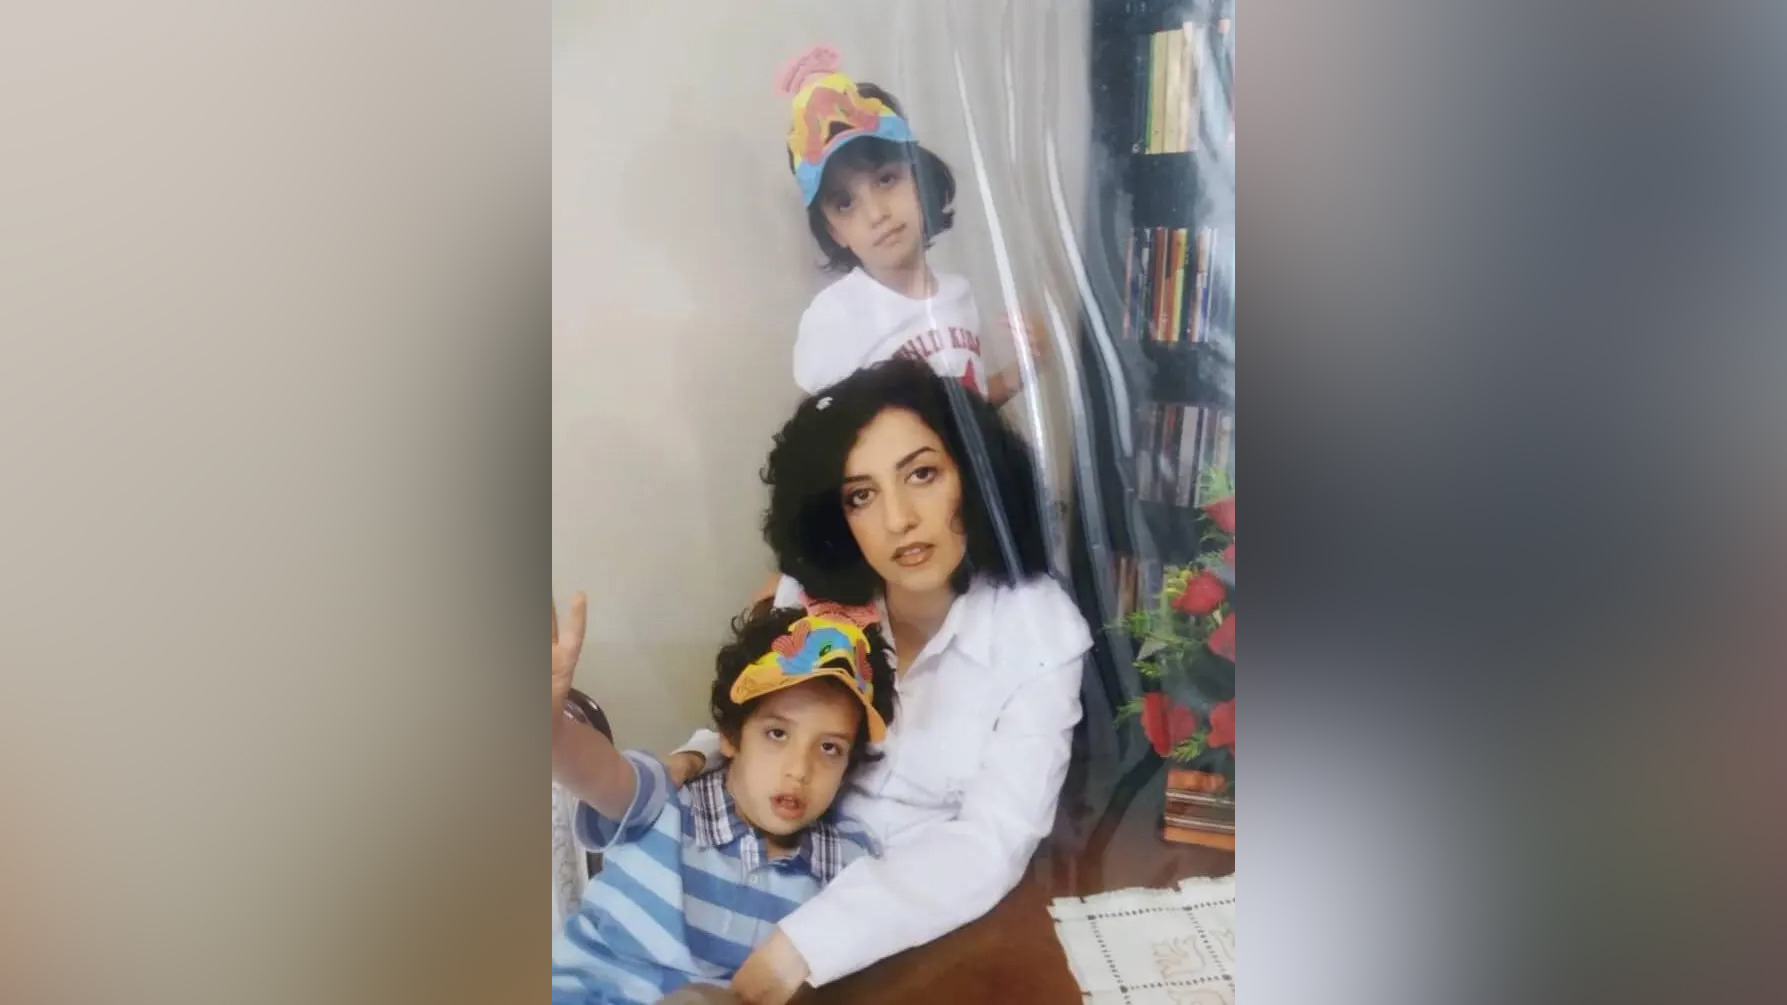 An archival photograph of Narges Mohammadi with her children, Kiana and Ali.